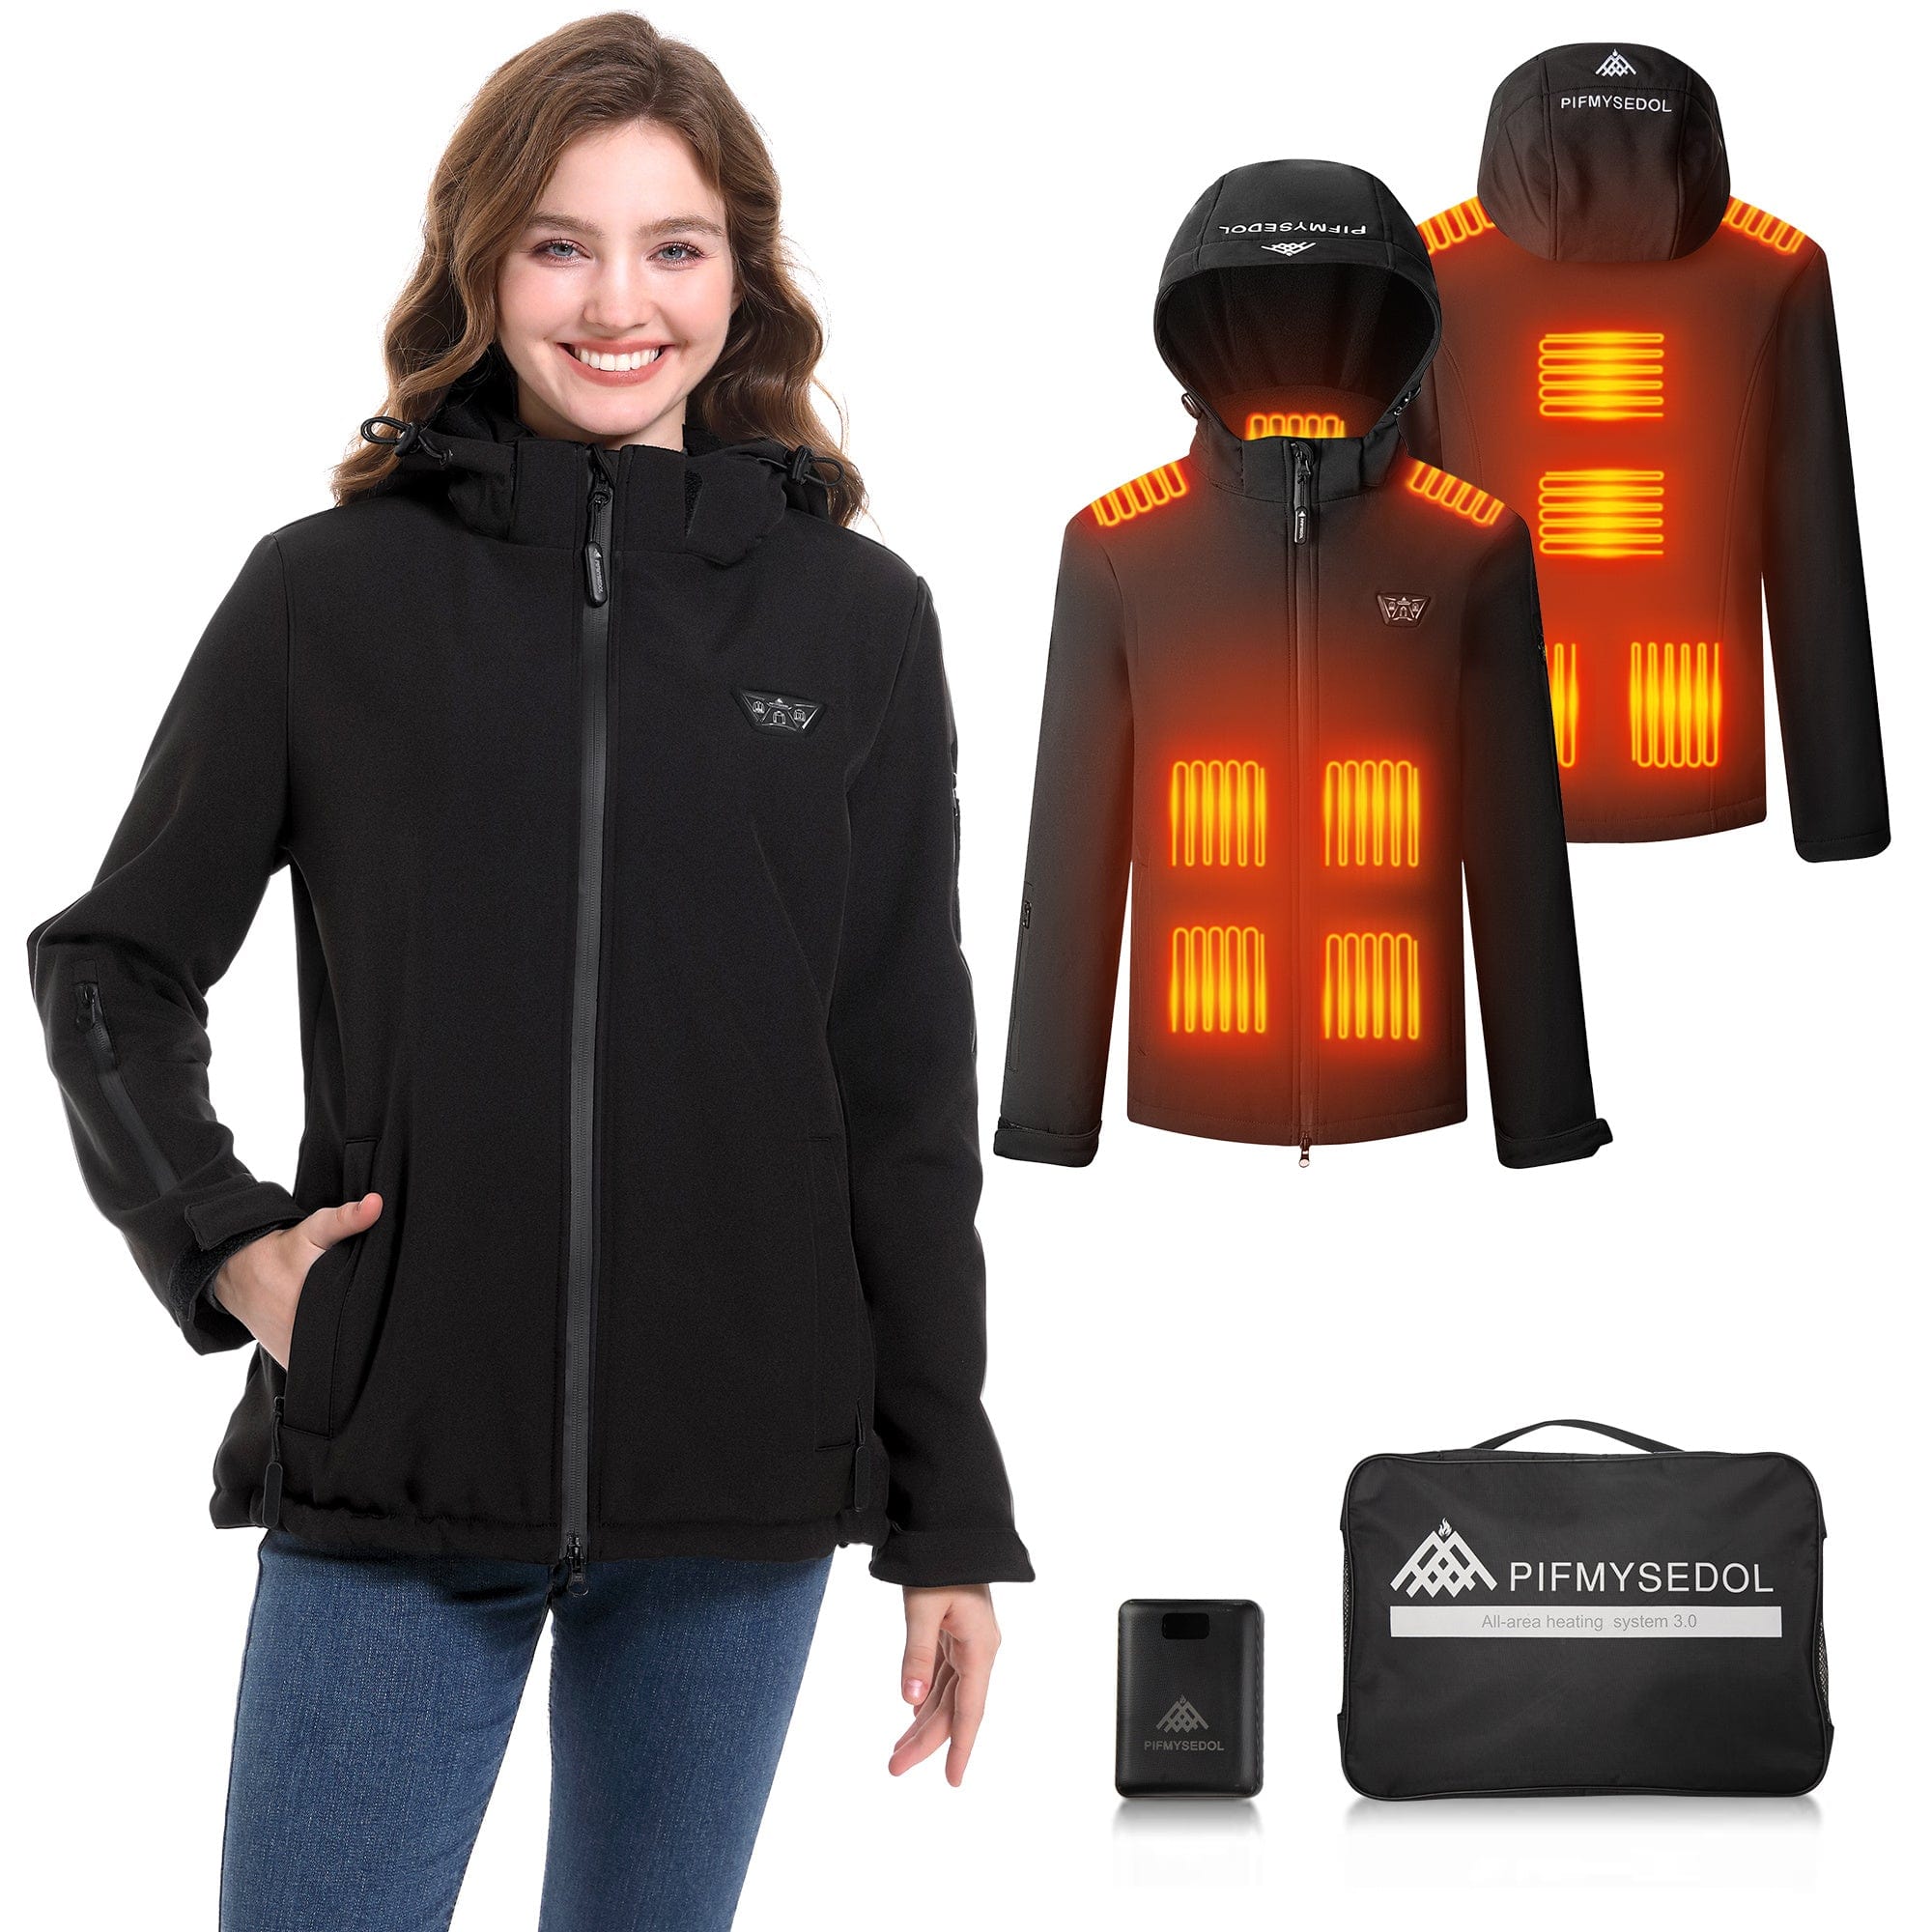 Women's Heated Jacket with 14400mAh Battery - 11-Zone Carbon Fiber Heating, - Machine Washable, Thermal Insulated Outdoor Sports Coat for Skiing, Hiking - Black